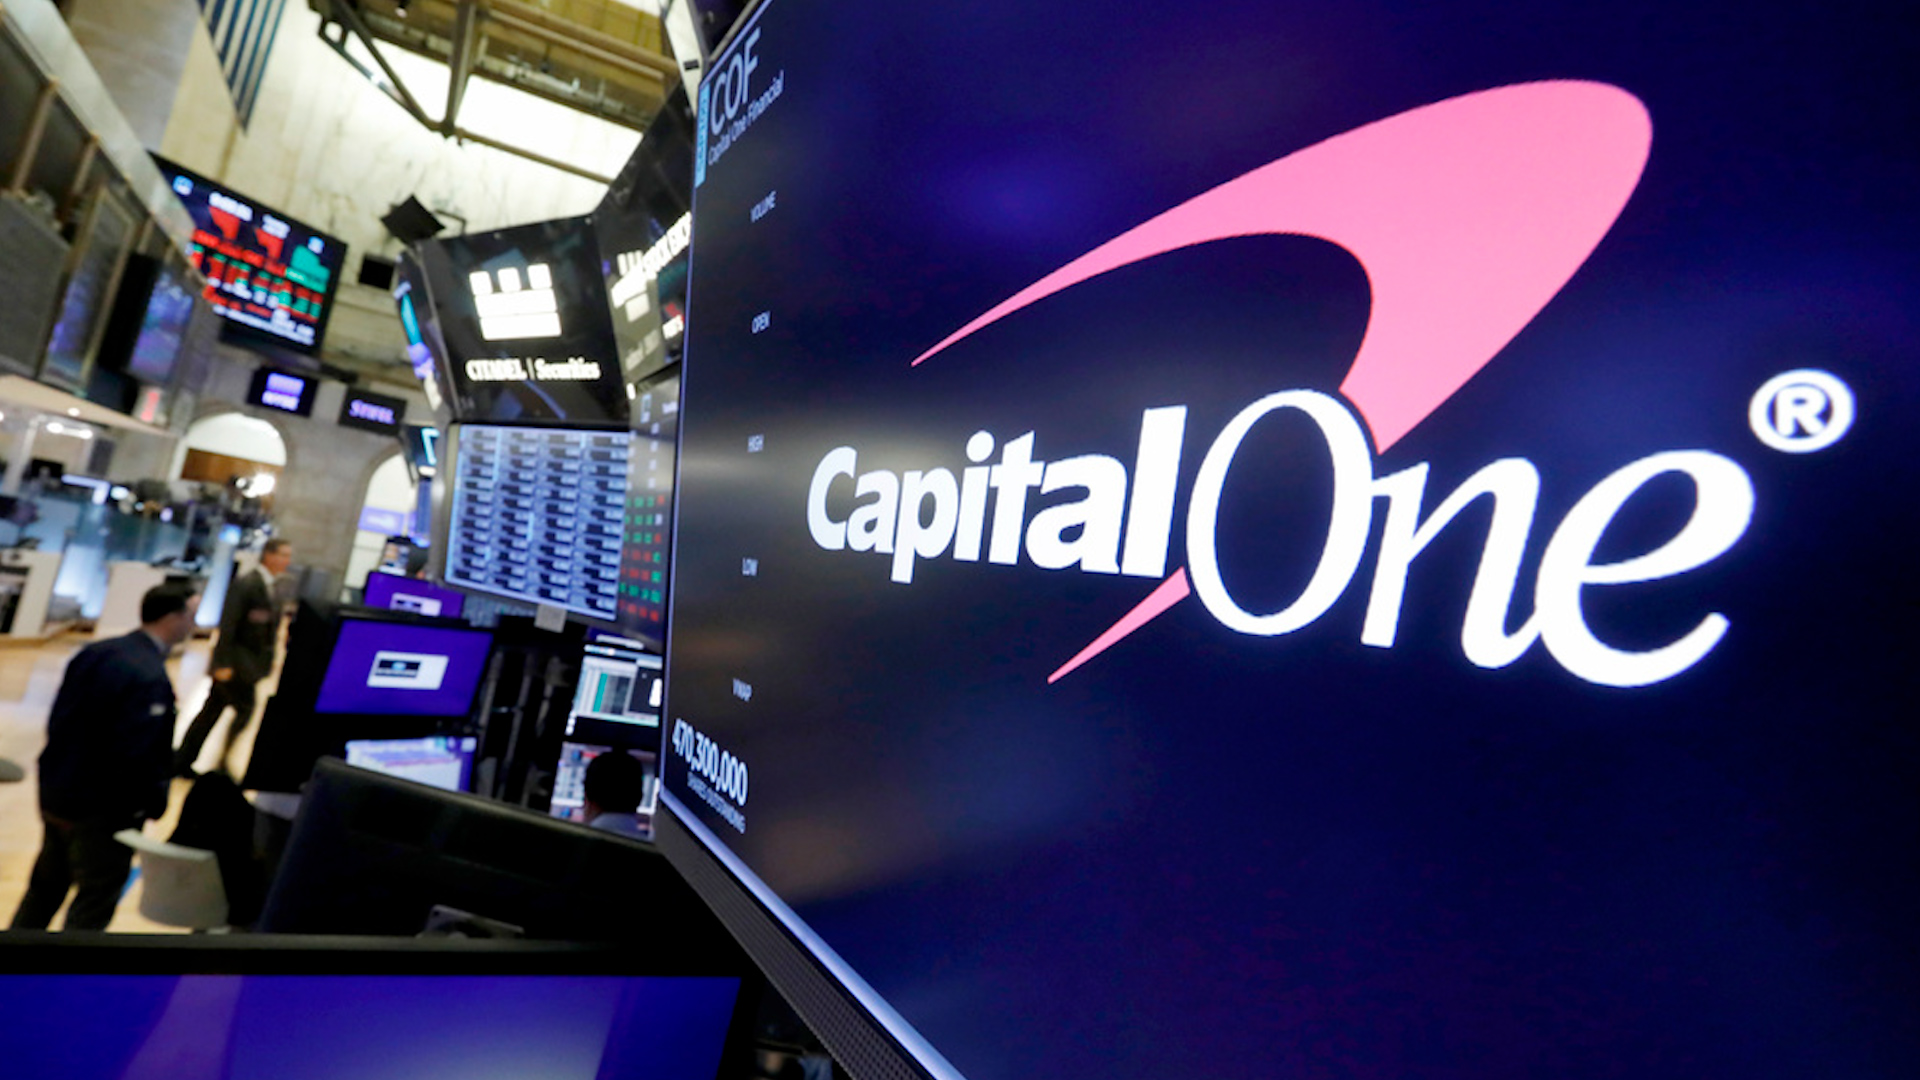 In a significant move that will likely reshape the landscape of the U.S. banking and credit card industry, Capital One Financial has announced plans to acquire Discover Financial for  billion. This transaction will merge two of the nation's premier lenders and credit card issuers, creating the sixth-largest bank in the United States.